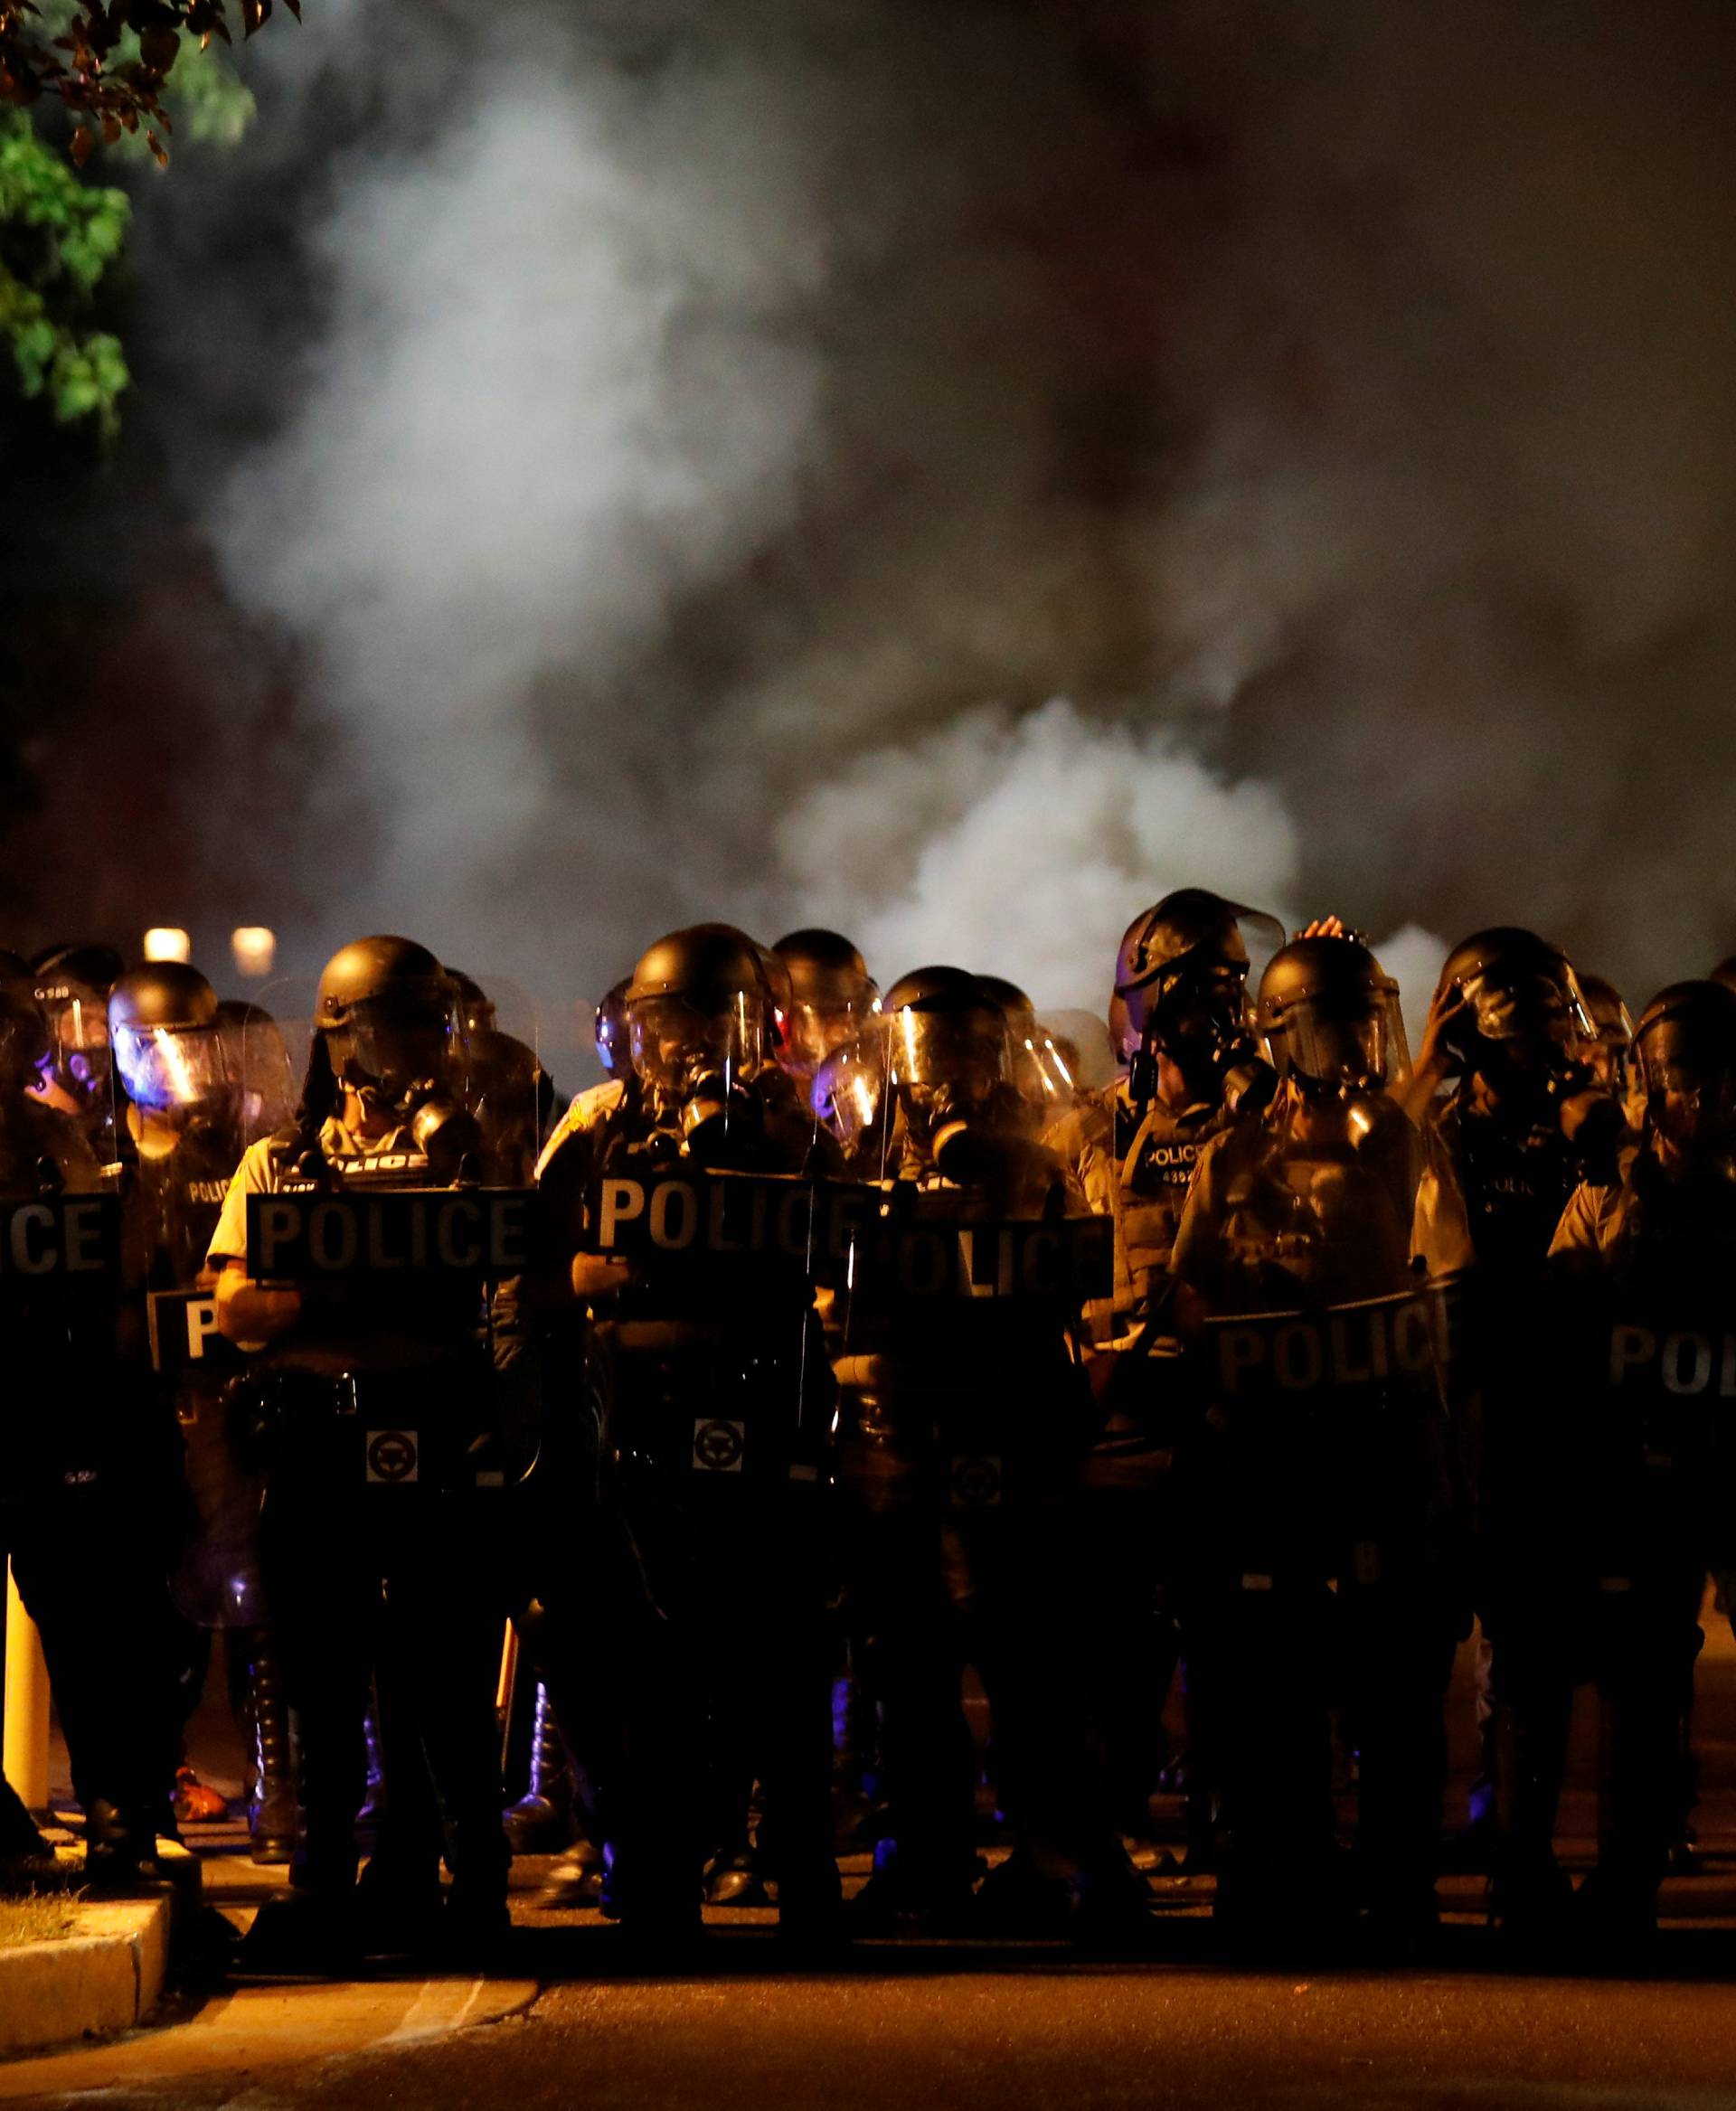 Law enforcement officials line a residential street where people protest following acquittal of Stockley in St Louis